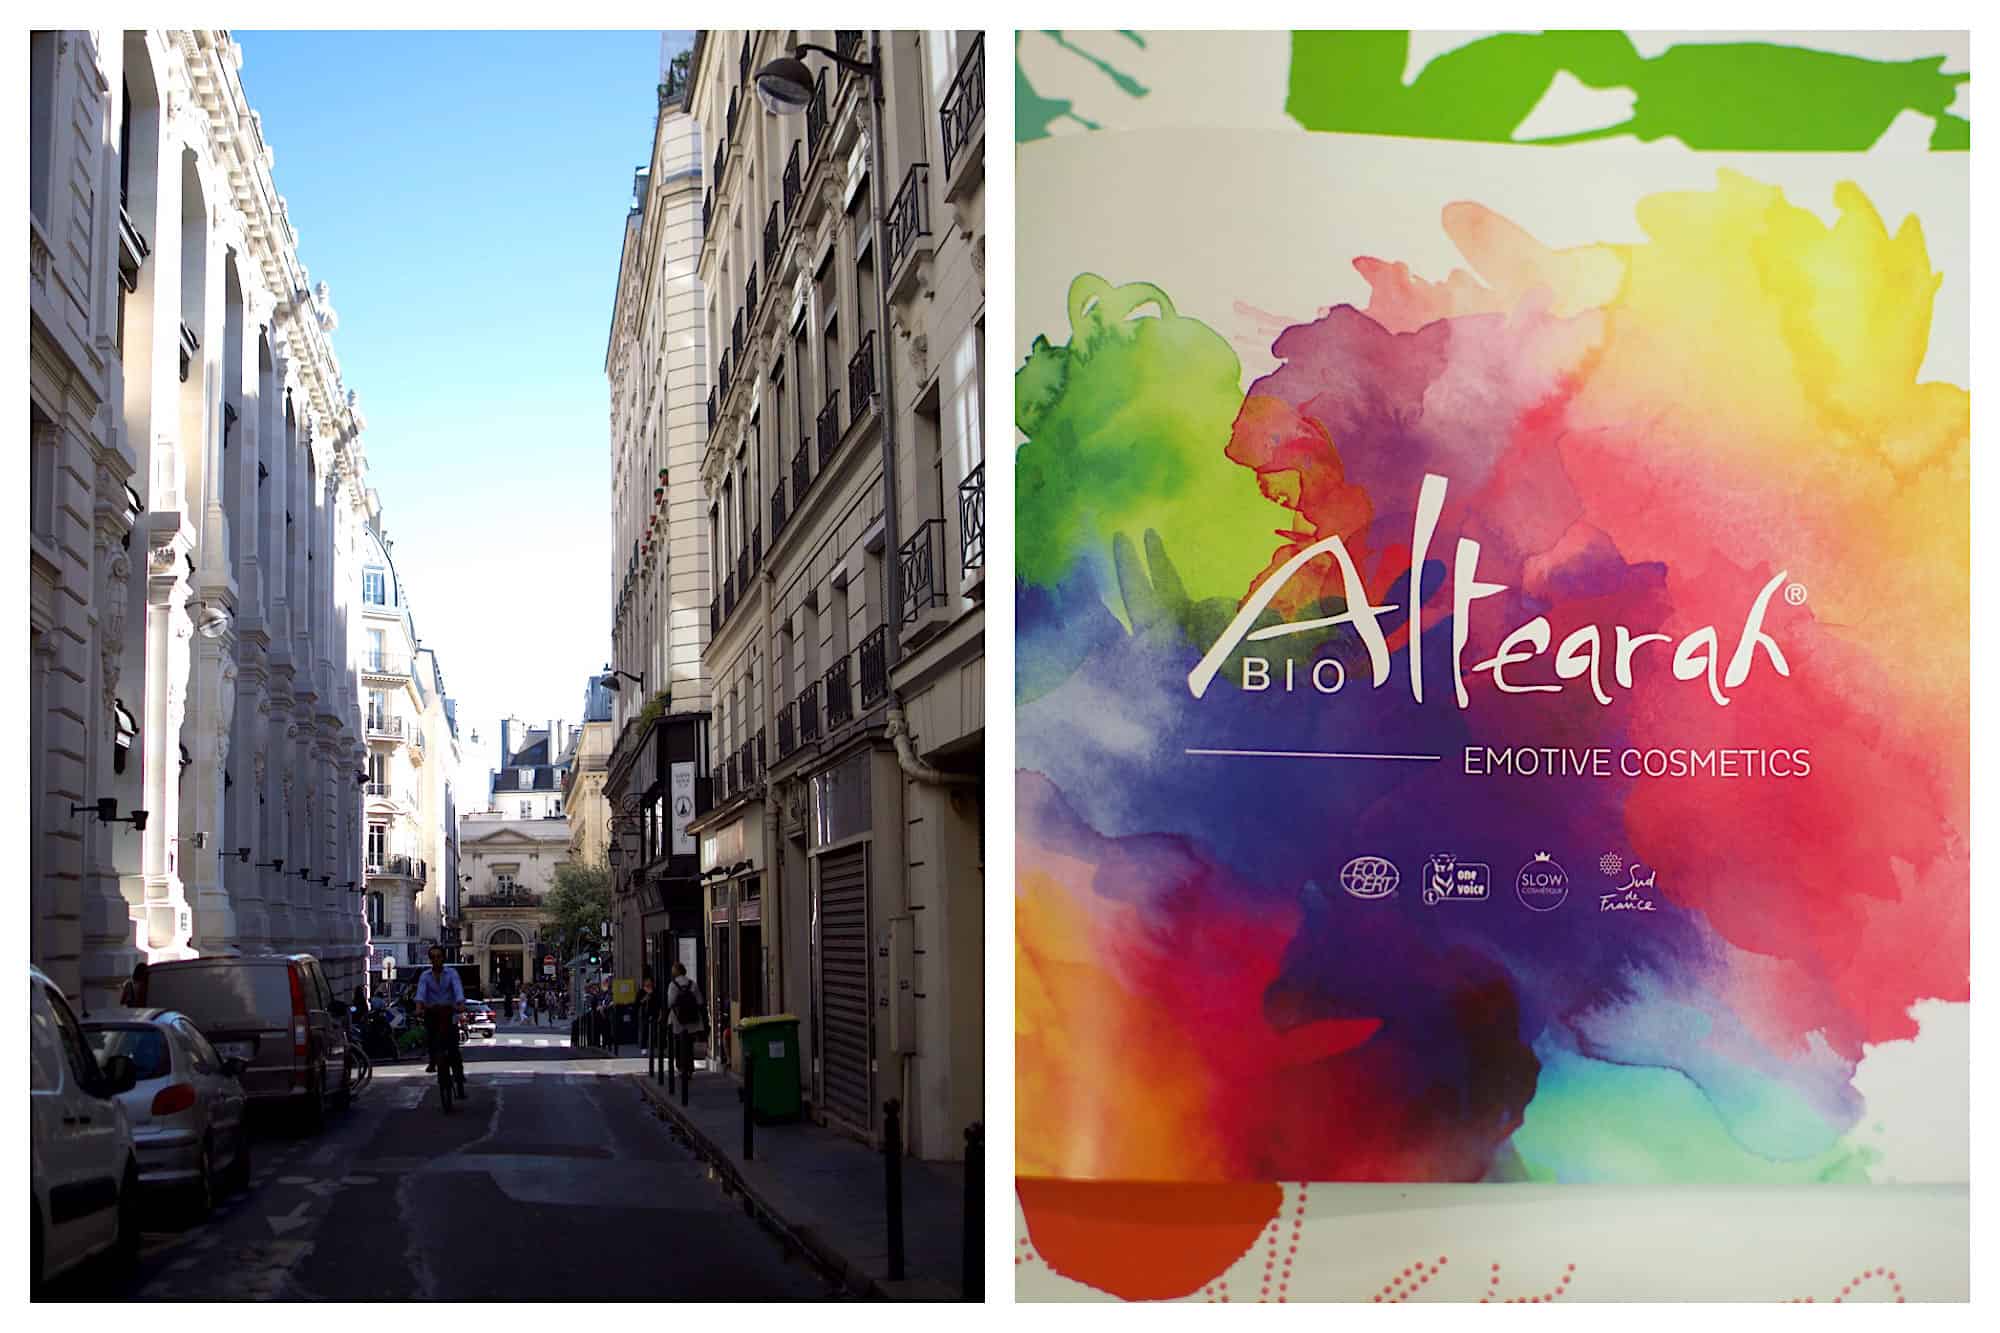 A view of a Paris street (left). The colorful label of Altearah Bio perfume (right).